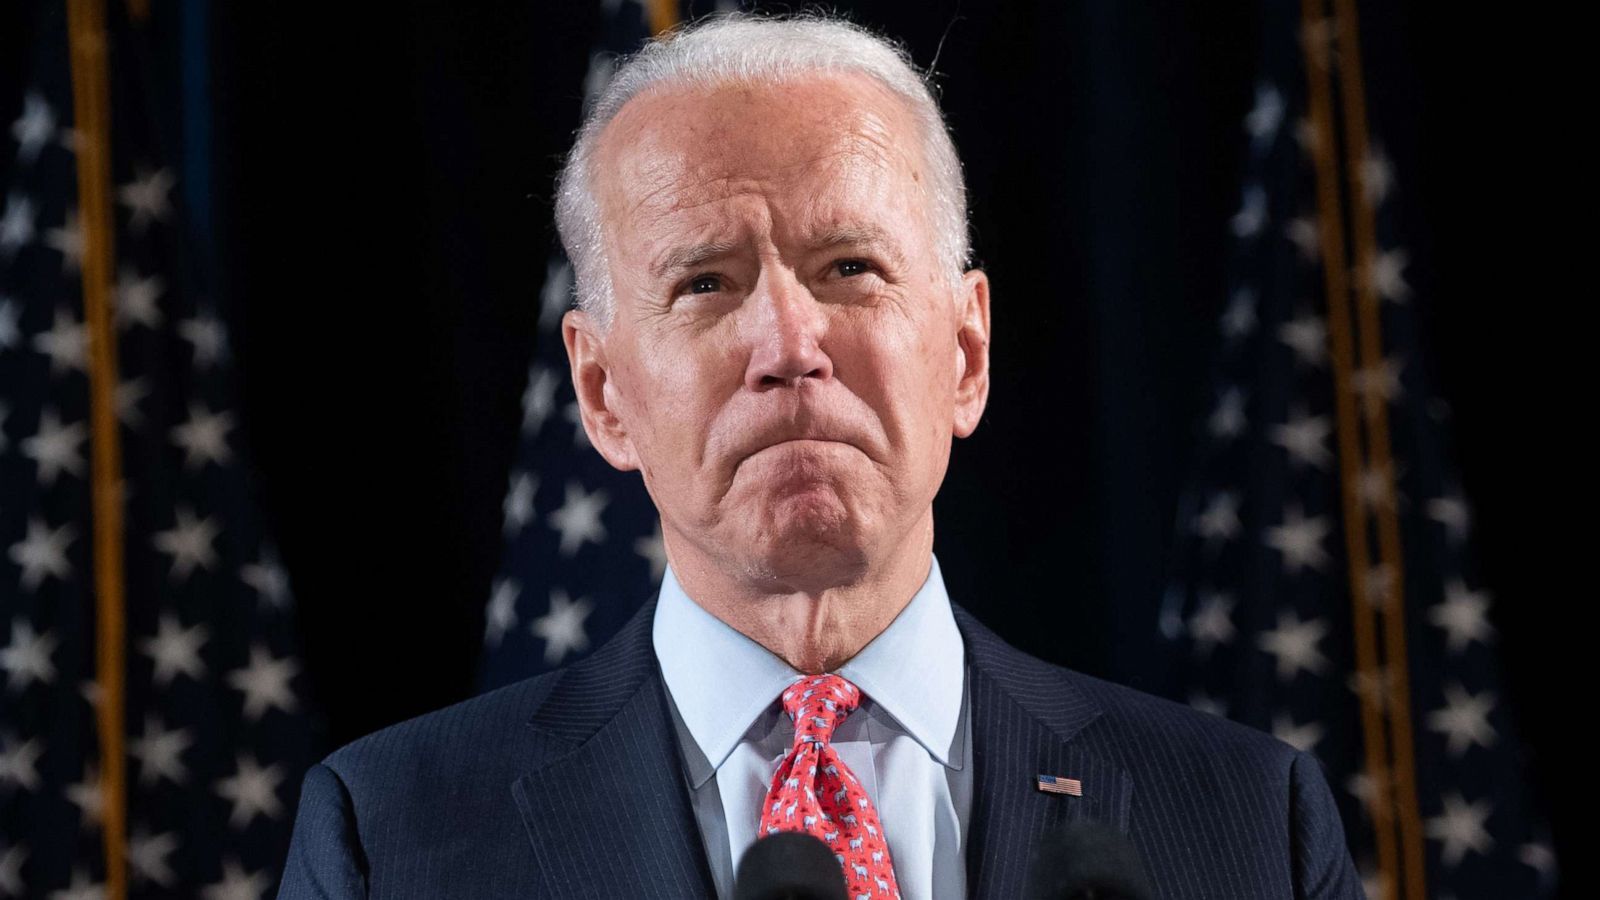 Joe Biden to scale up campaign as Democratic anxiety grows ahead